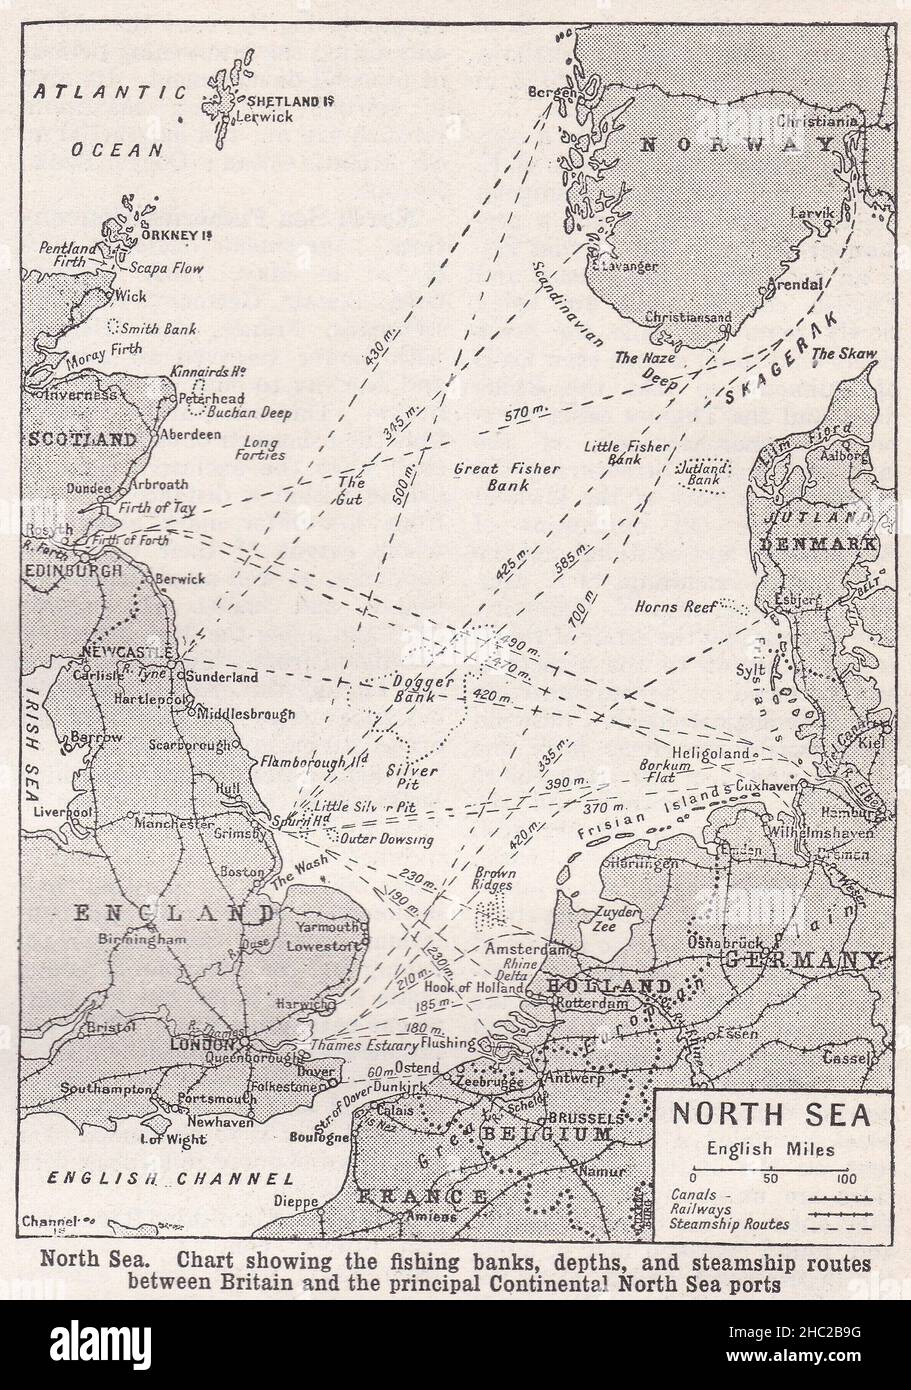 Vintage map of the North Sea - Chart showing the fishing banks, depths, and steamship routes between Britain and Continental North Sea Ports 1930s. Stock Photo